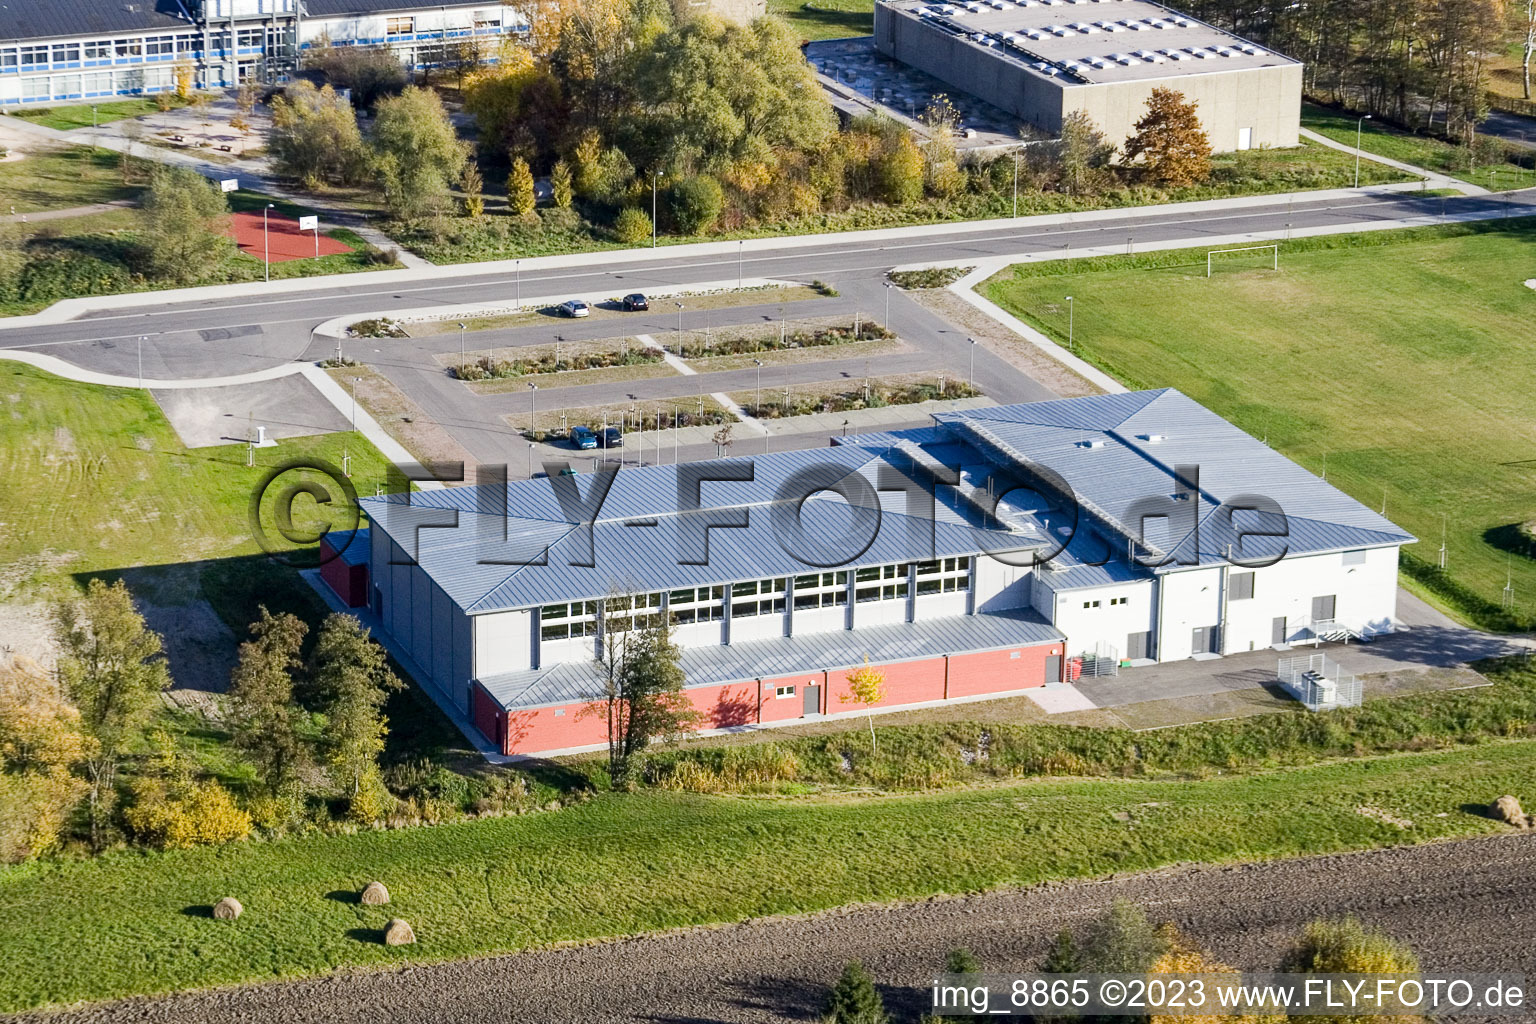 Bienwaldhalle in Kandel in the state Rhineland-Palatinate, Germany seen from above